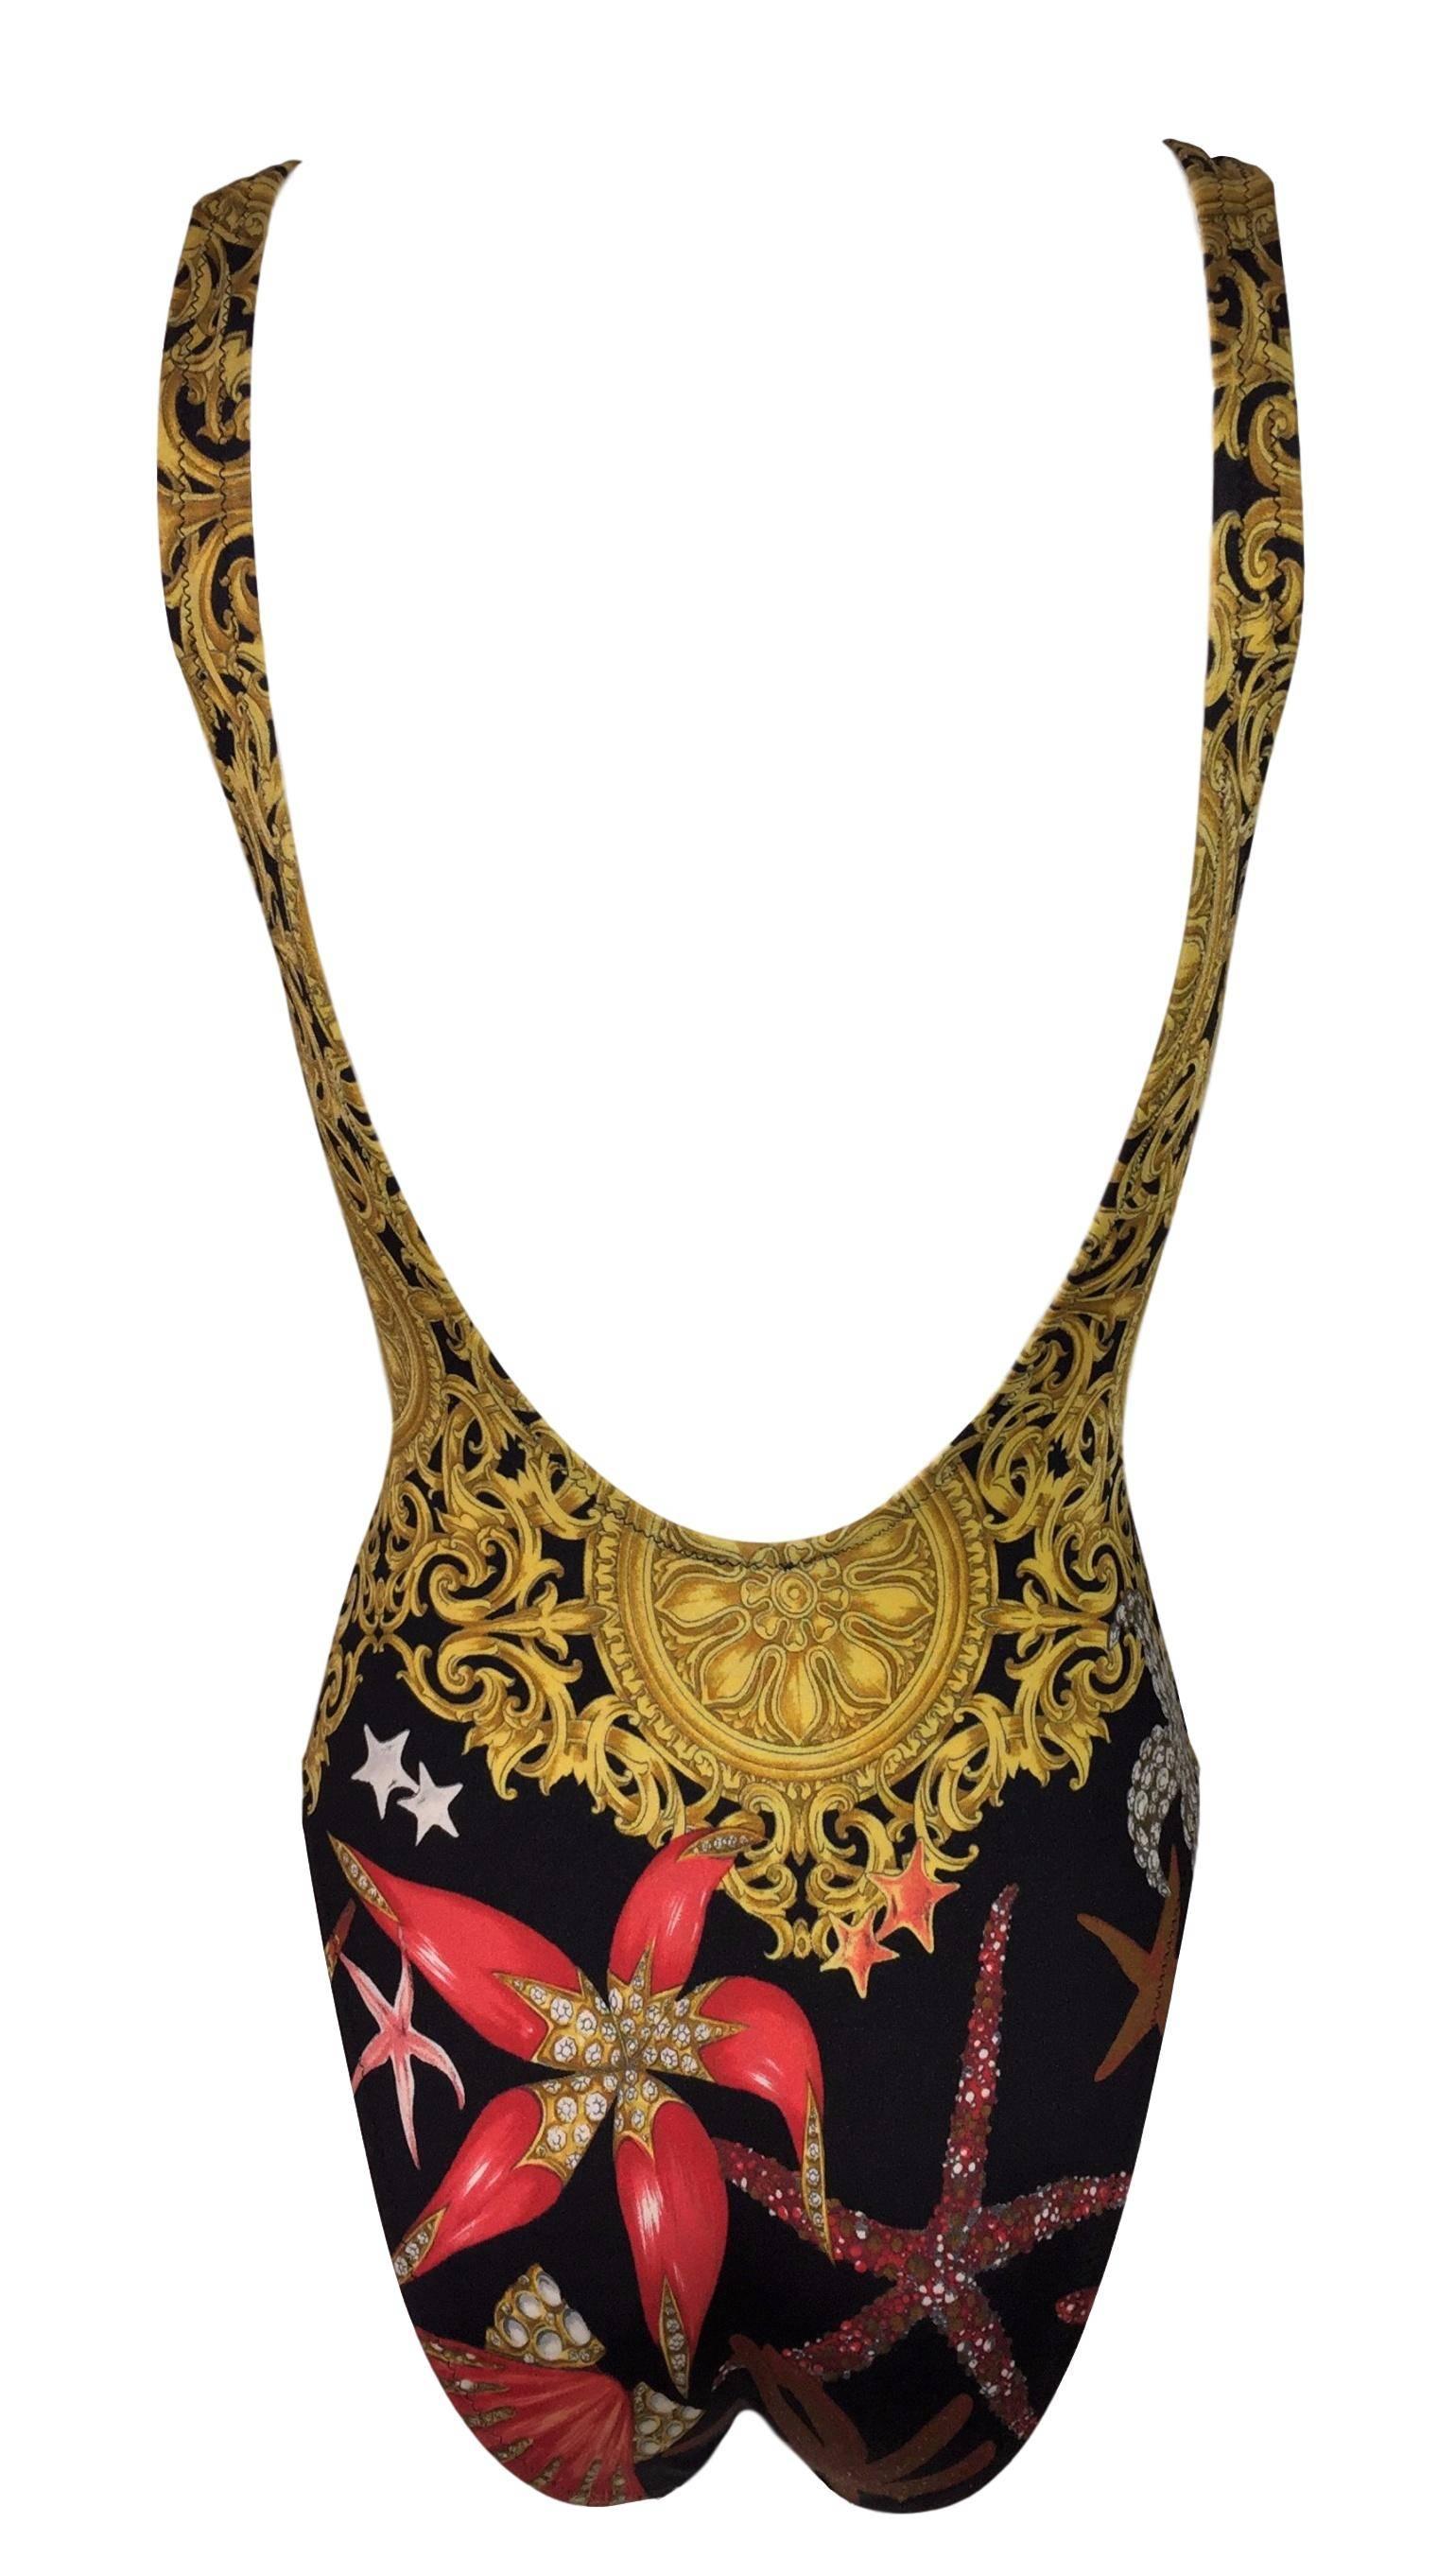 DESIGNER: S/S 1992 Gianni Versace- in the last photo we show this gorgeous piece along with our 1994 crinkled safety pin blouse, they look flawless together!

Please contact for more information and/or photos.

CONDITION: Good- overall it looks